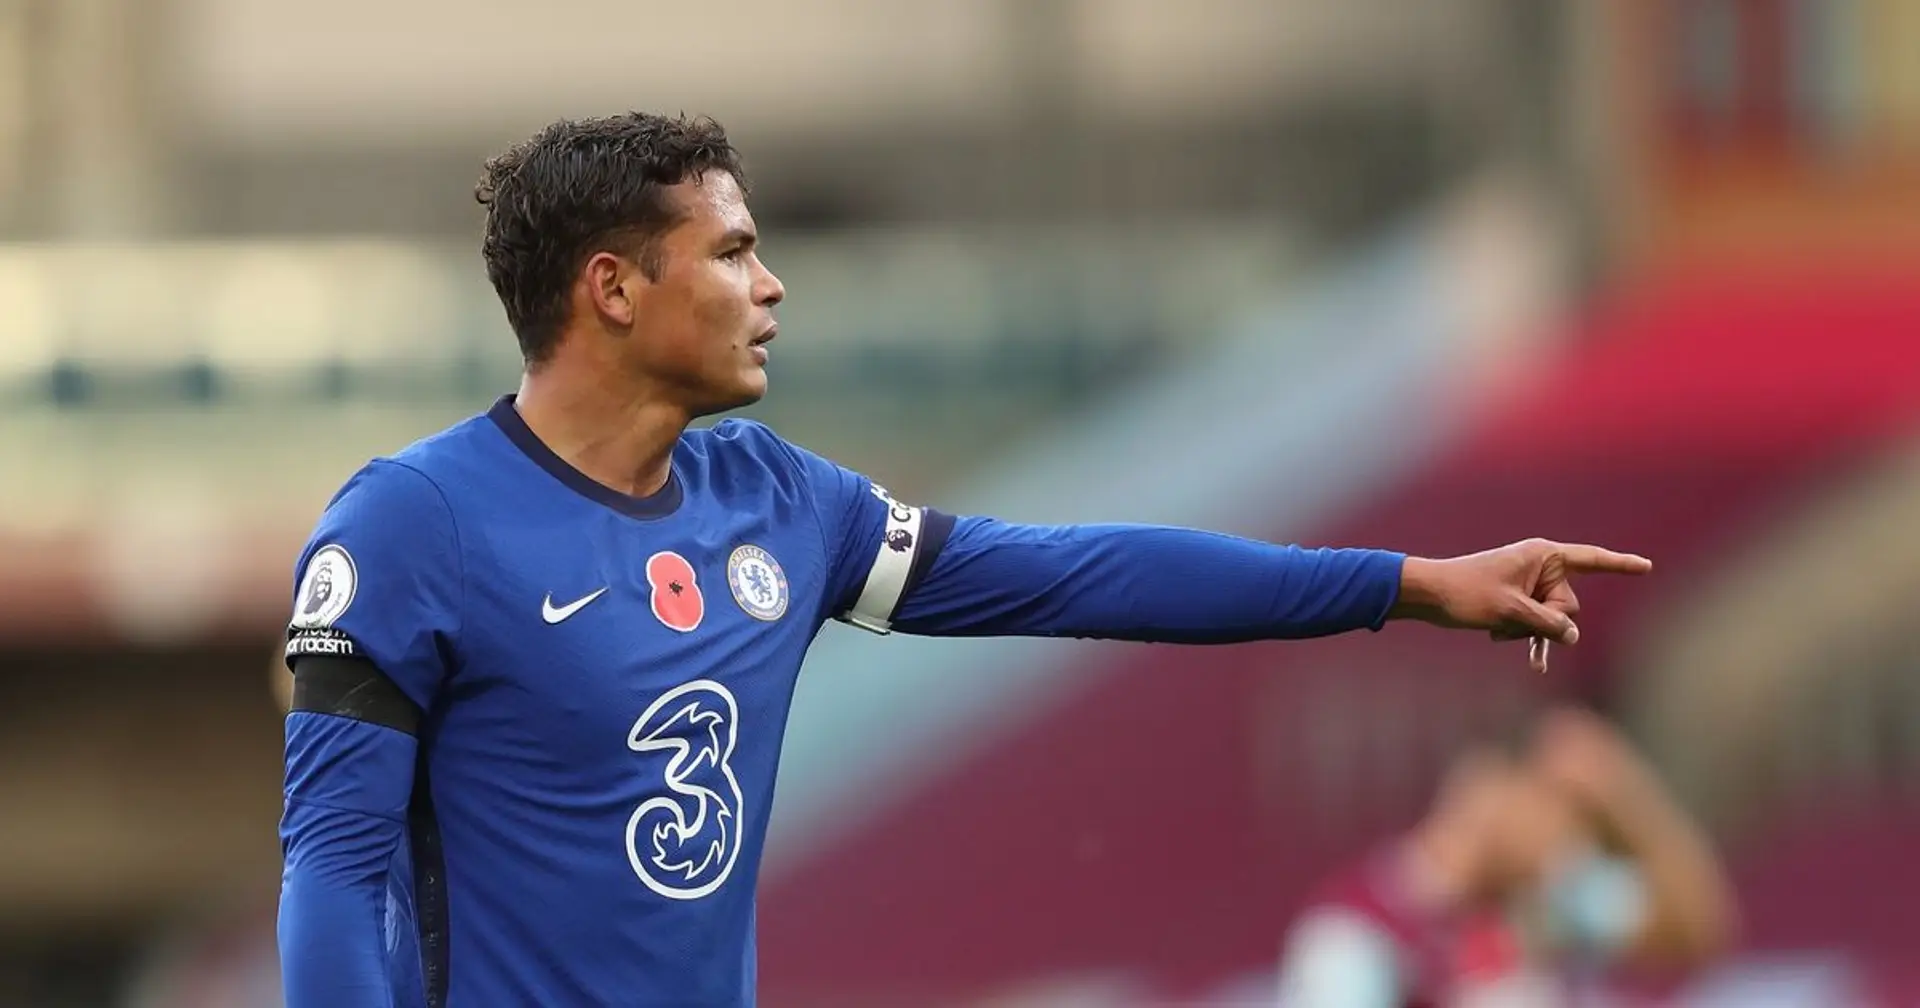 3 reasons why Thiago Silva's long-range passing is crucial to Chelsea